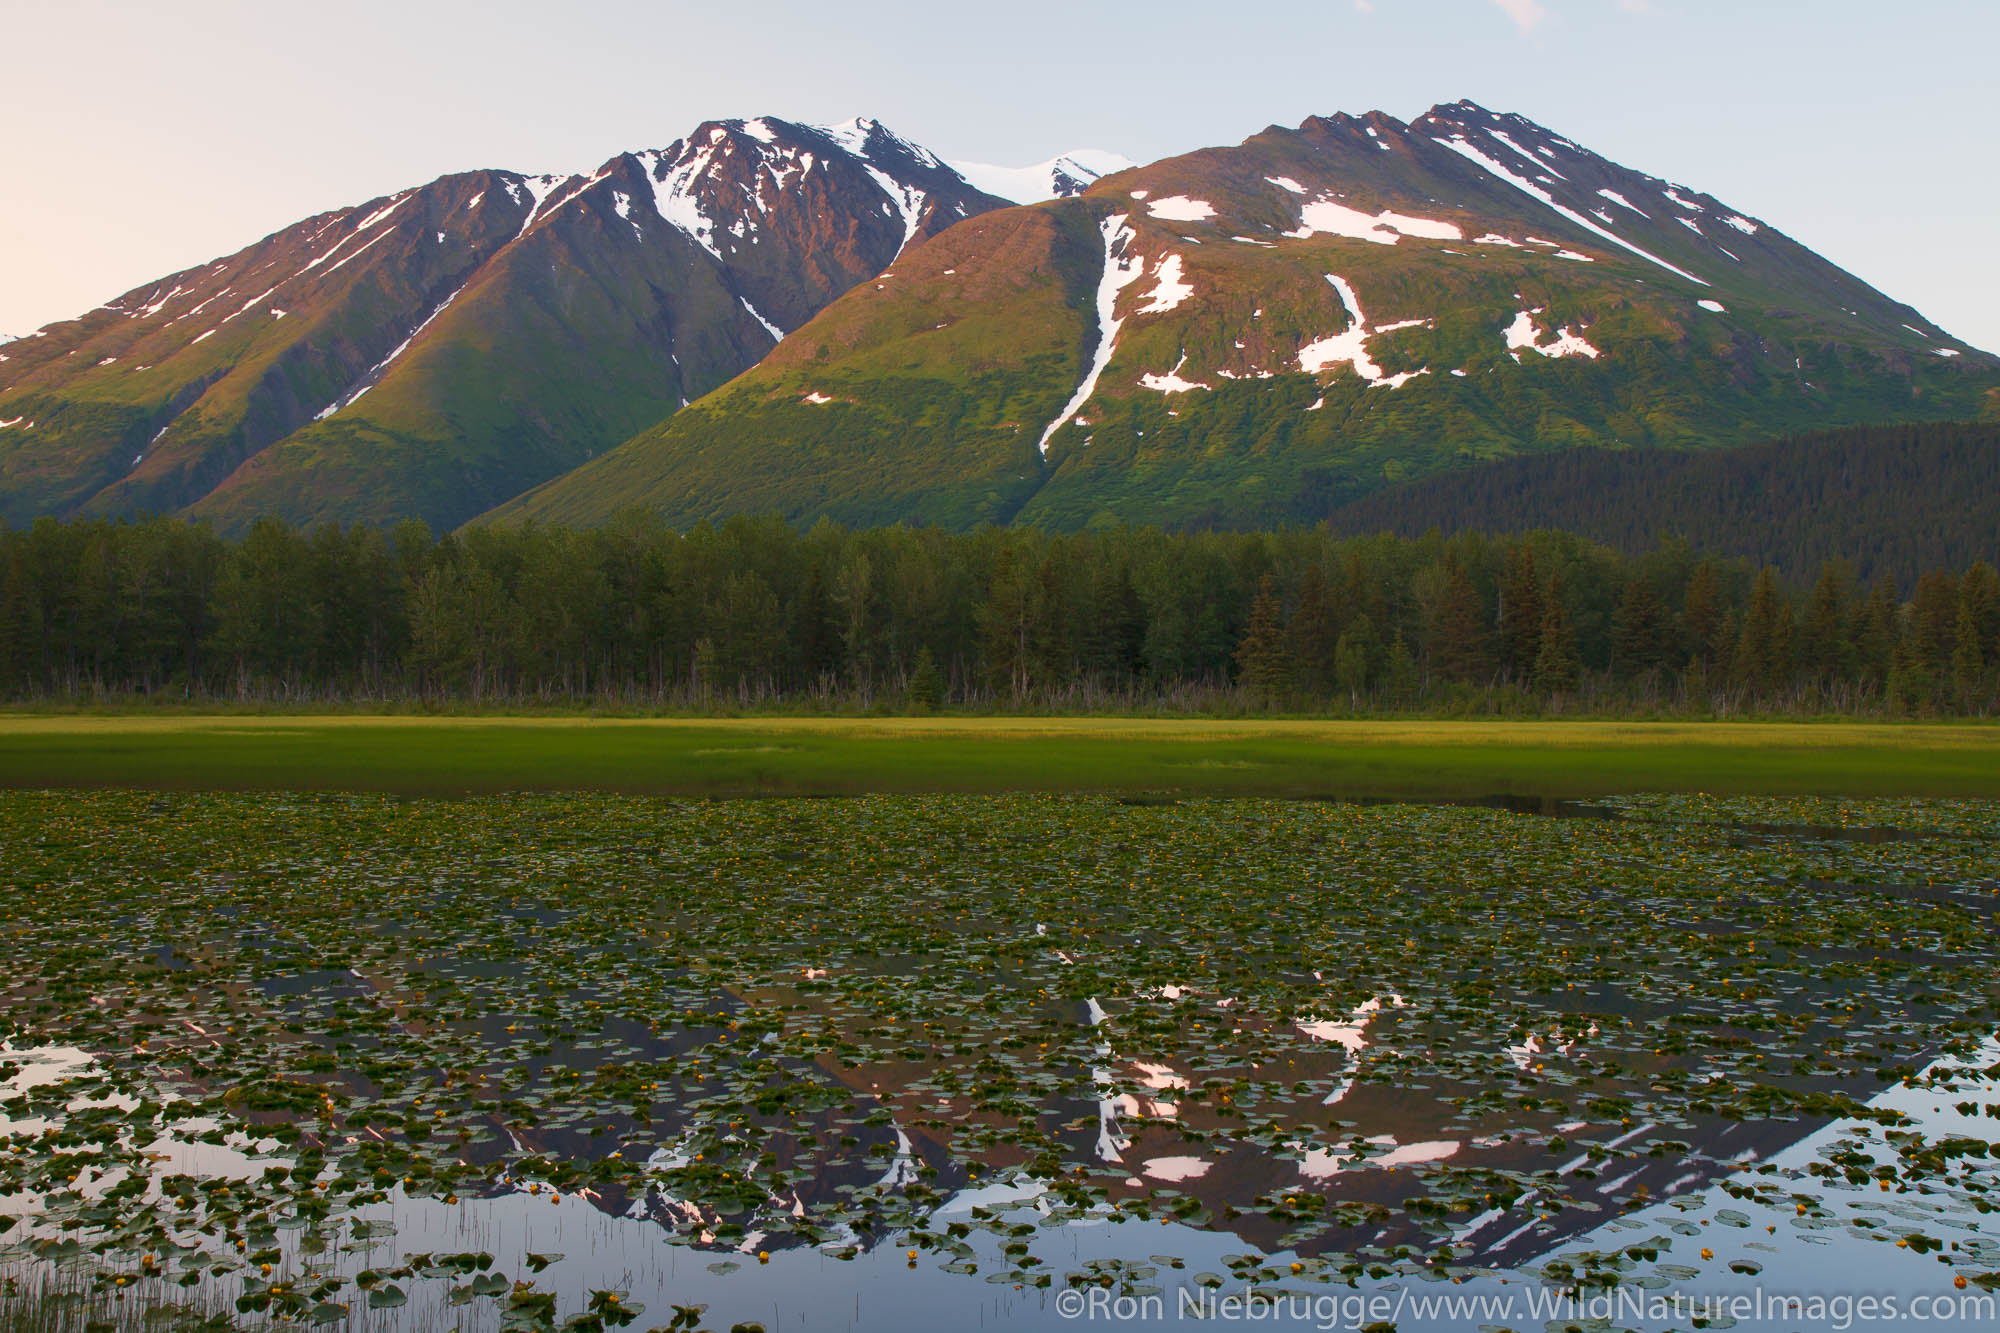 A lily pond in the Chugach National Forest, Alaska.